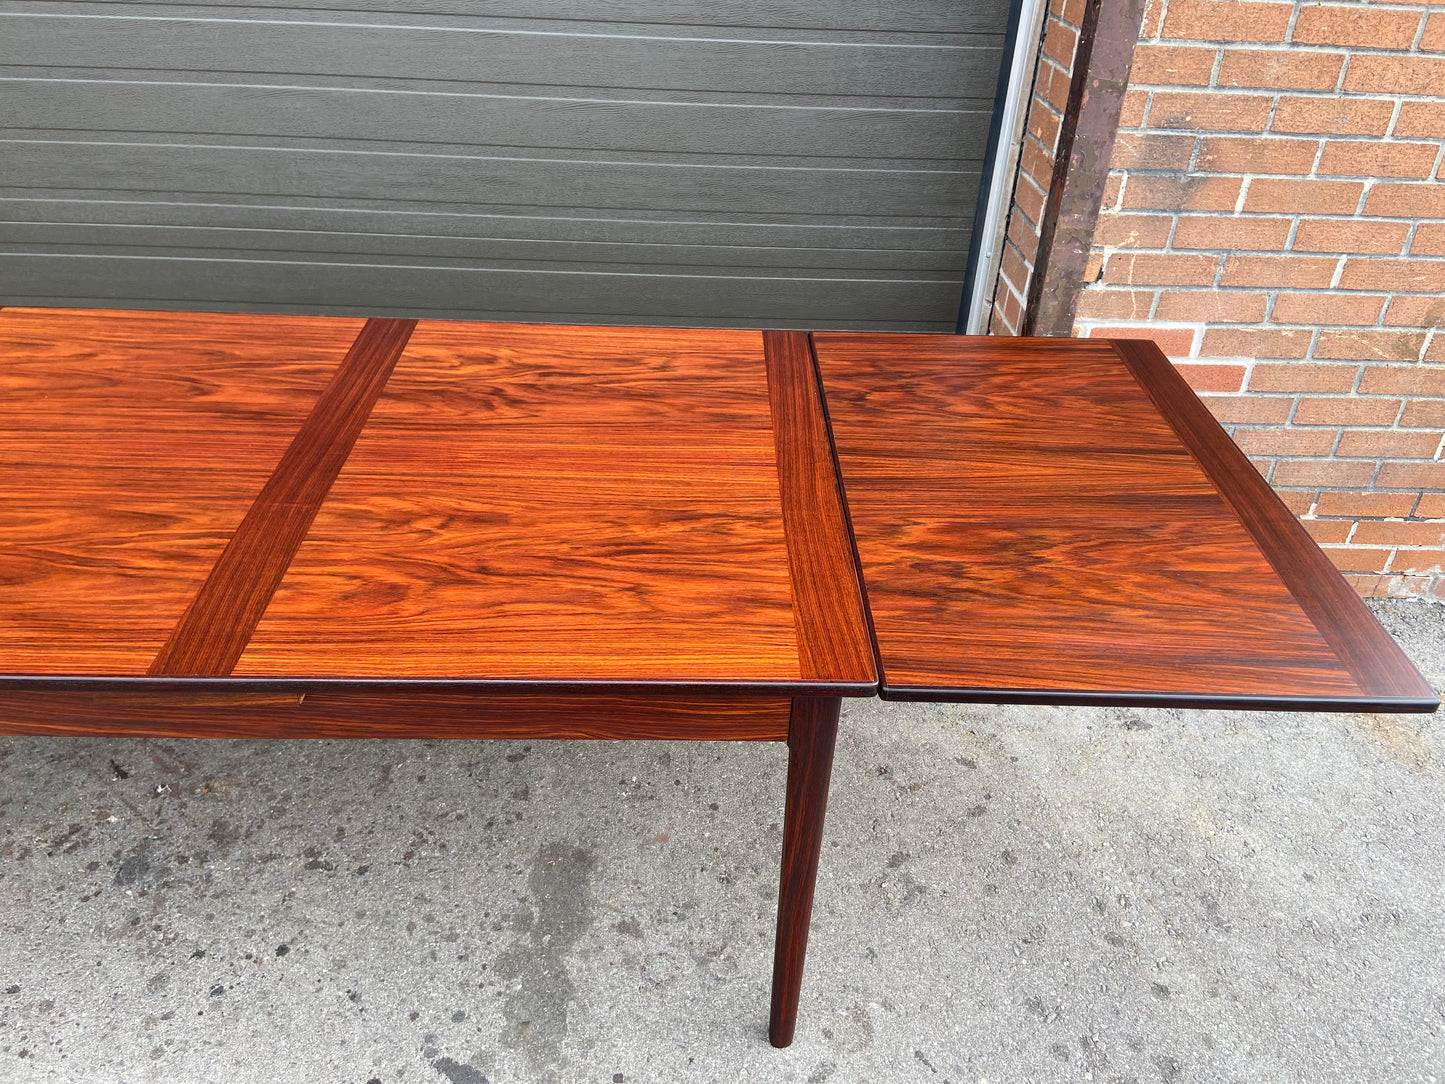 REFINISHED Danish Mid Century Modern Rosewood Draw Leaf Table 55" - 102" PERFECT